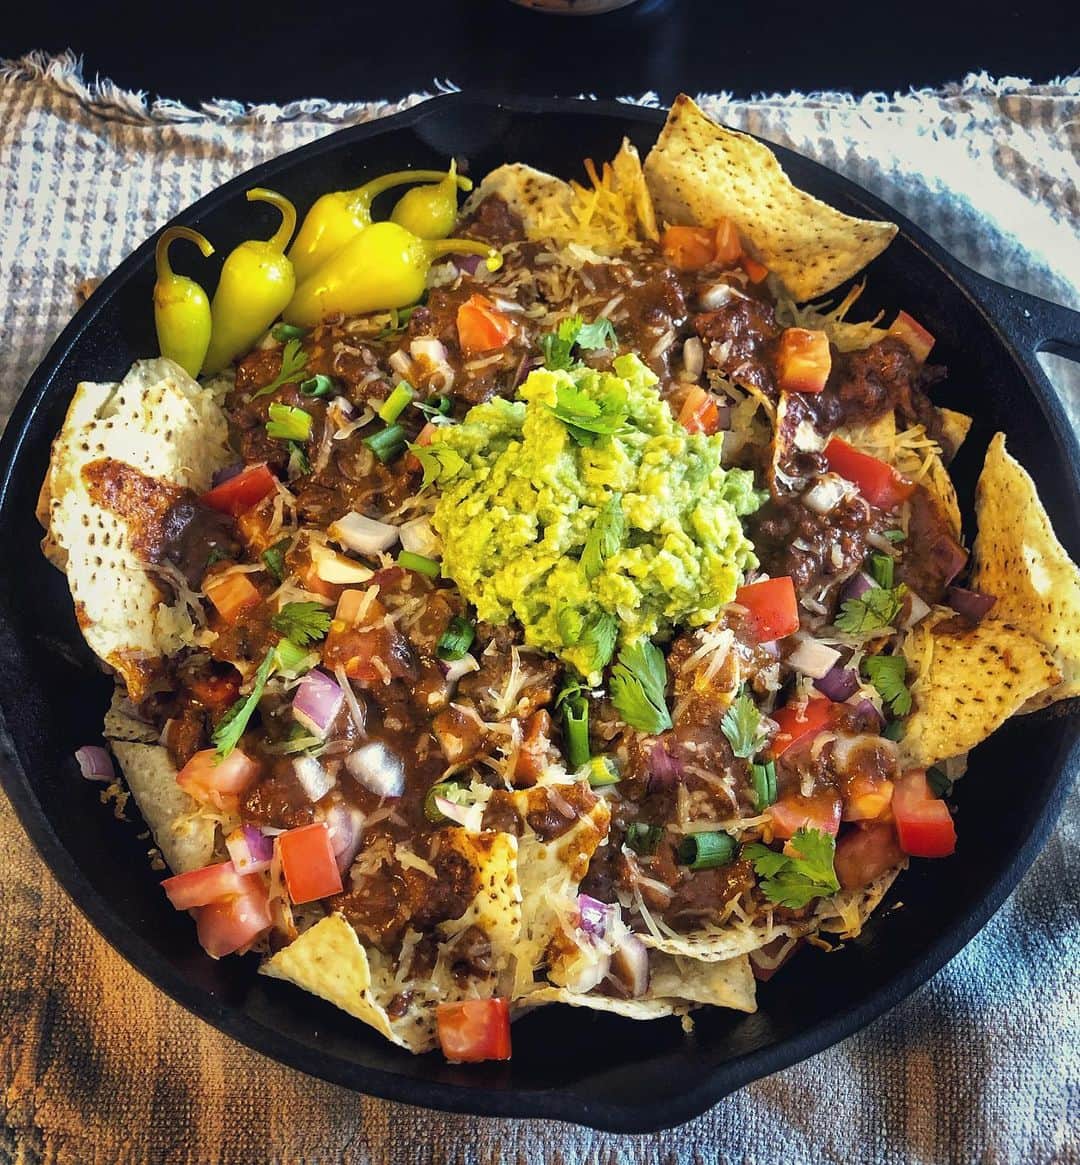 Jada Lalita Patipaksiriのインスタグラム：「These nachos pair well with Sunday football 🏈🍻  #nachos #mexicanfood #lunch #snack #appetizer #cheatday #spicy #brunch #food #fresh #cooking #veggies #yum #foodpics #foodie #food #cravings #recipe #thaicook」